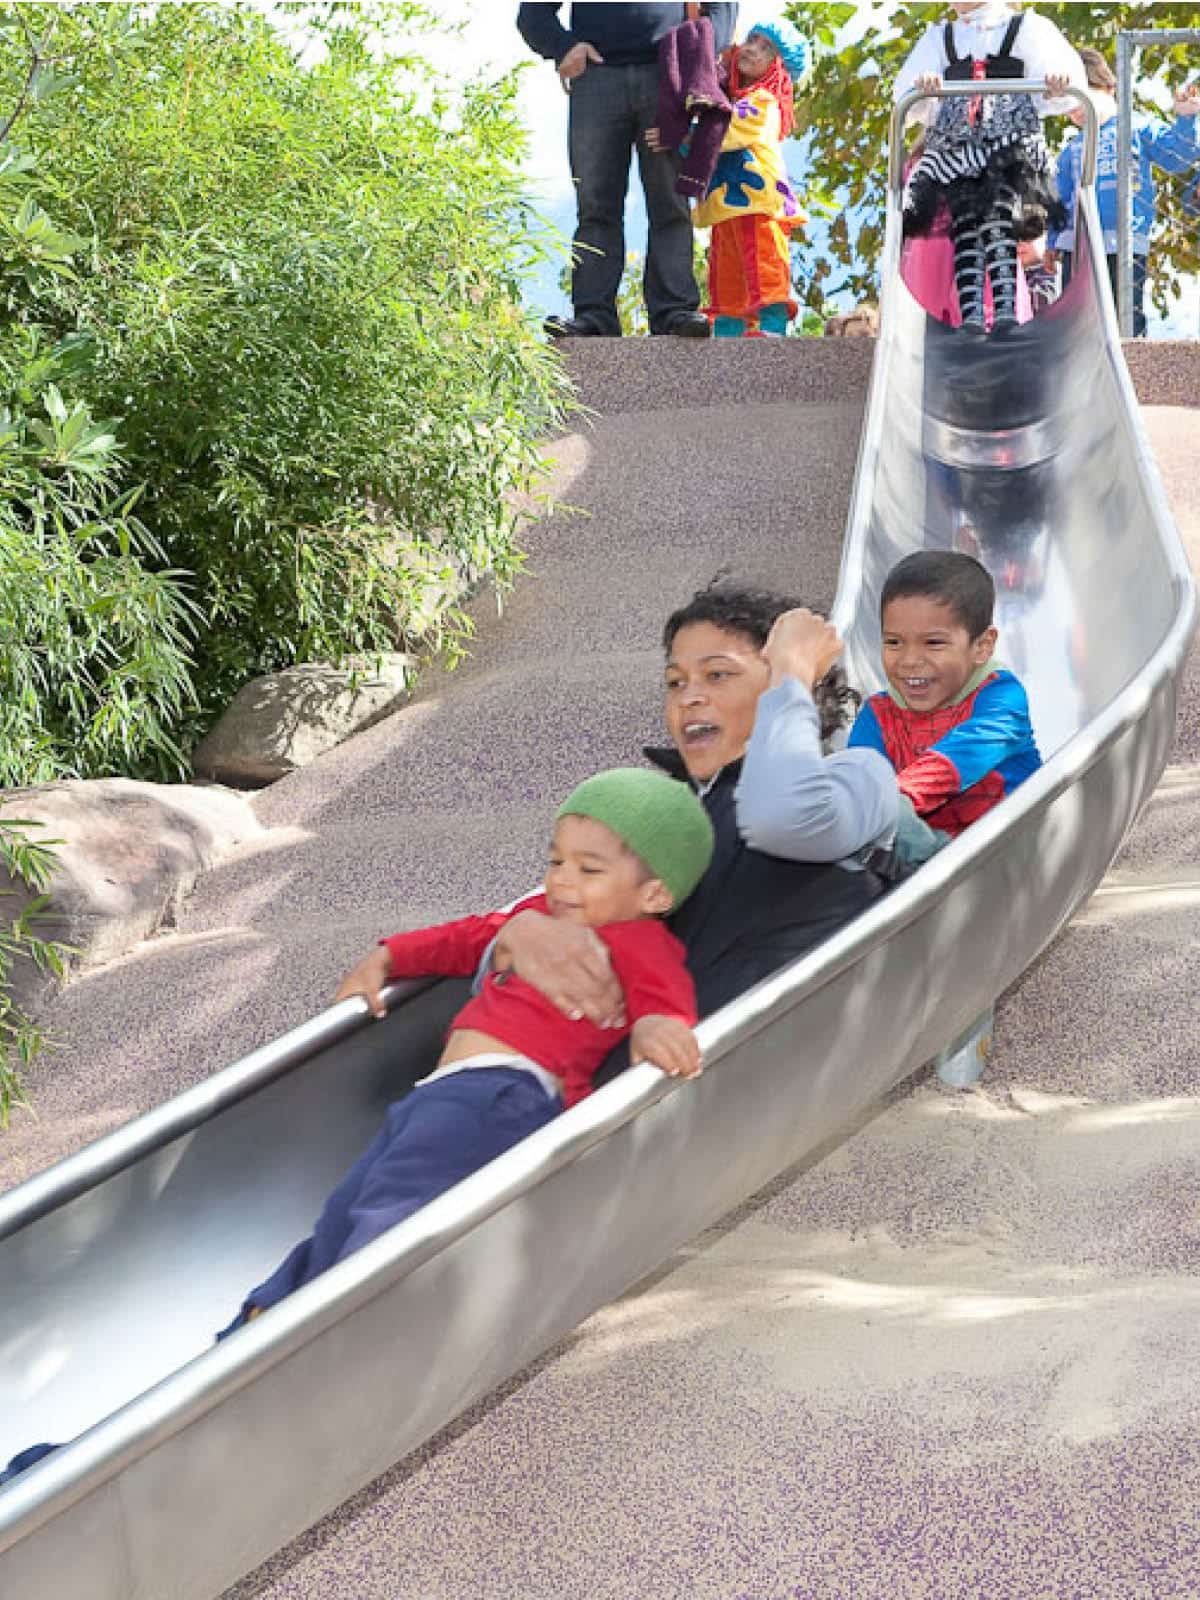 Mother and two children sliding down a slide on a sunny day.